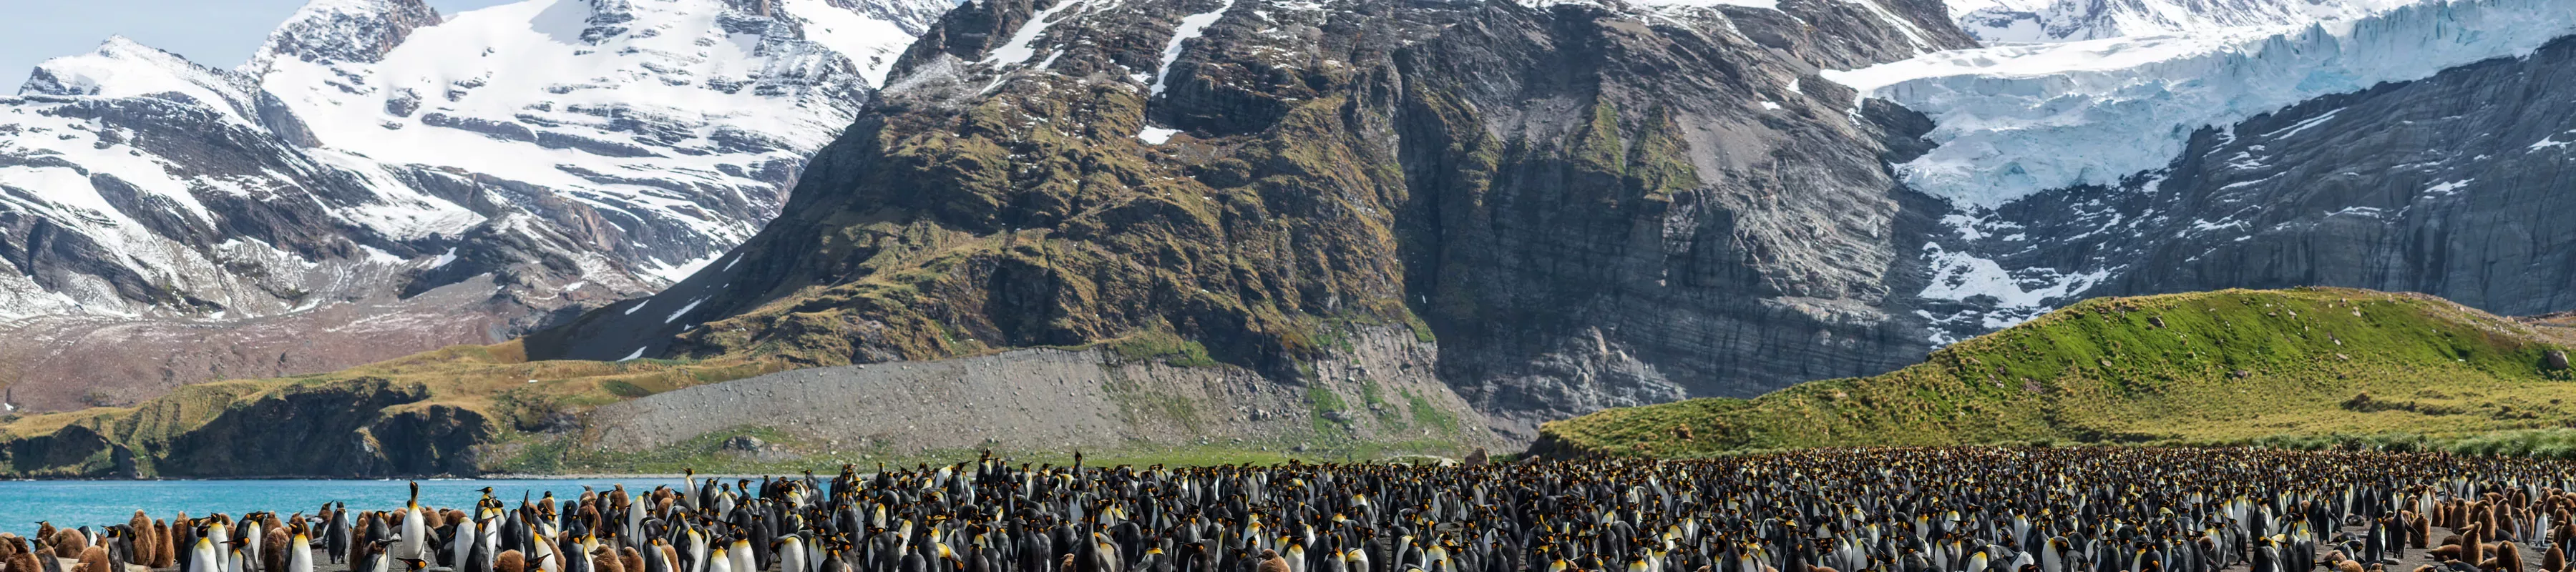 A beach crowded with penguins infront of a mountainour landscape